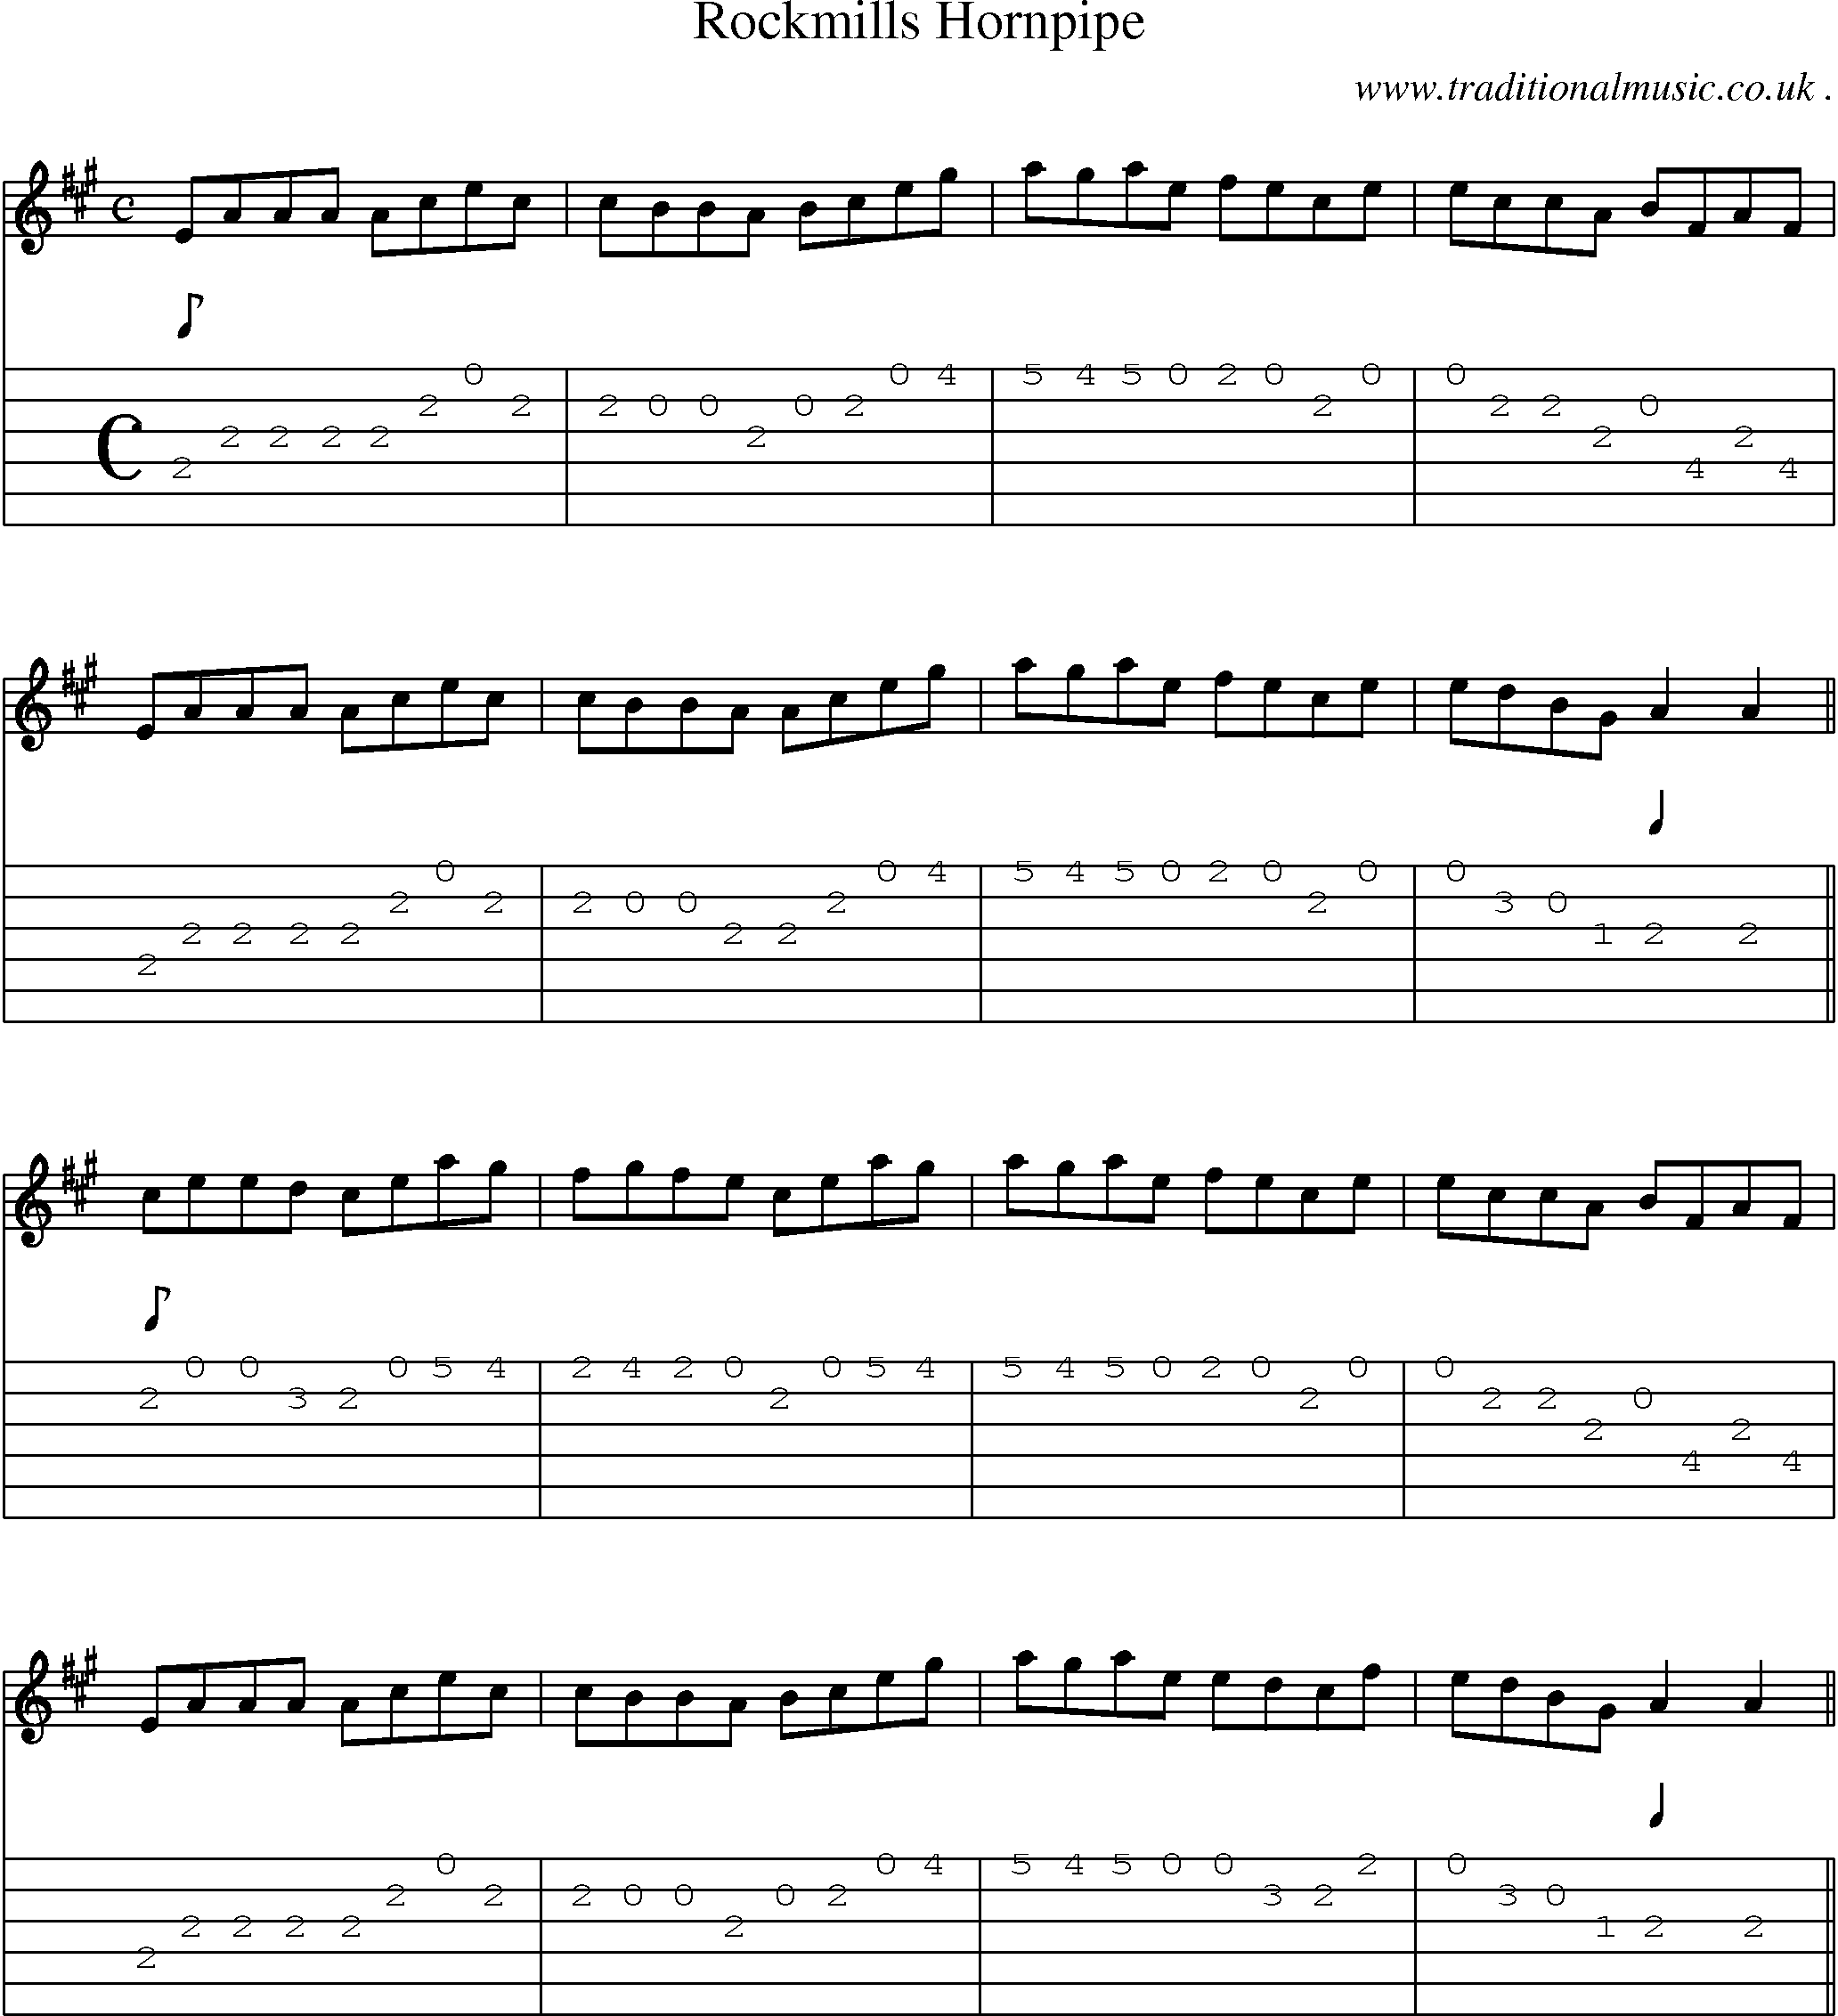 Sheet-Music and Guitar Tabs for Rockmills Hornpipe